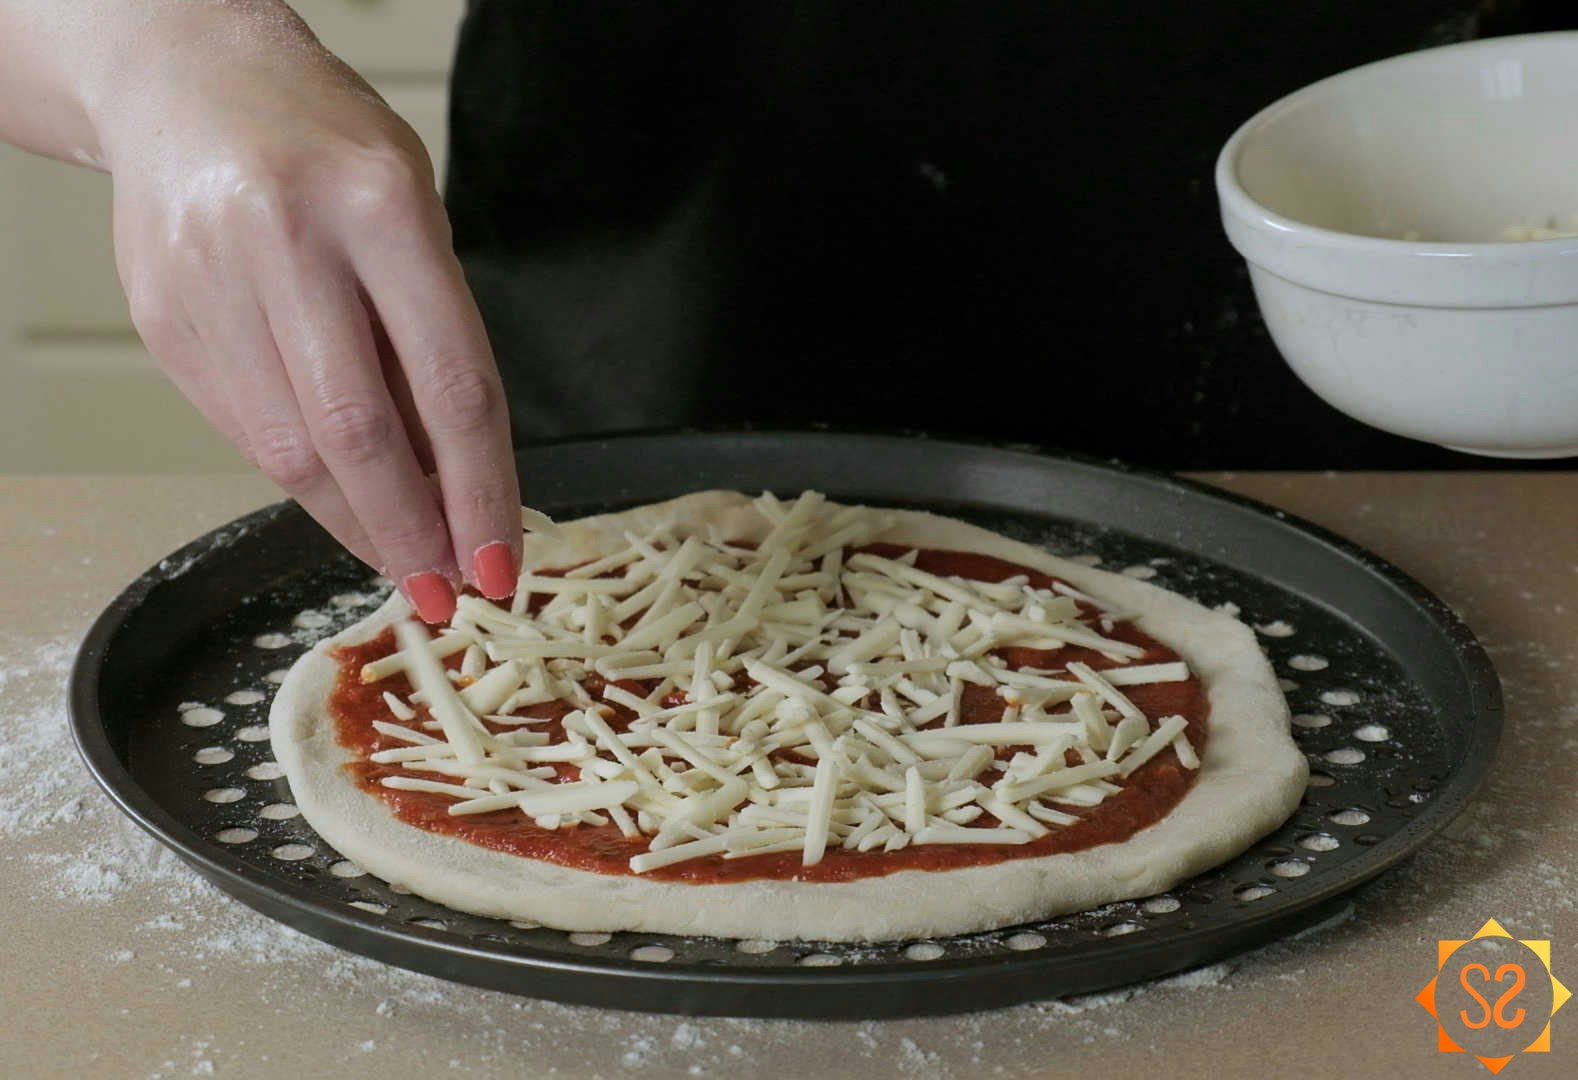 A hand sprinkling vegan cheese on top of an uncooked pizza on a vented pizza pan.